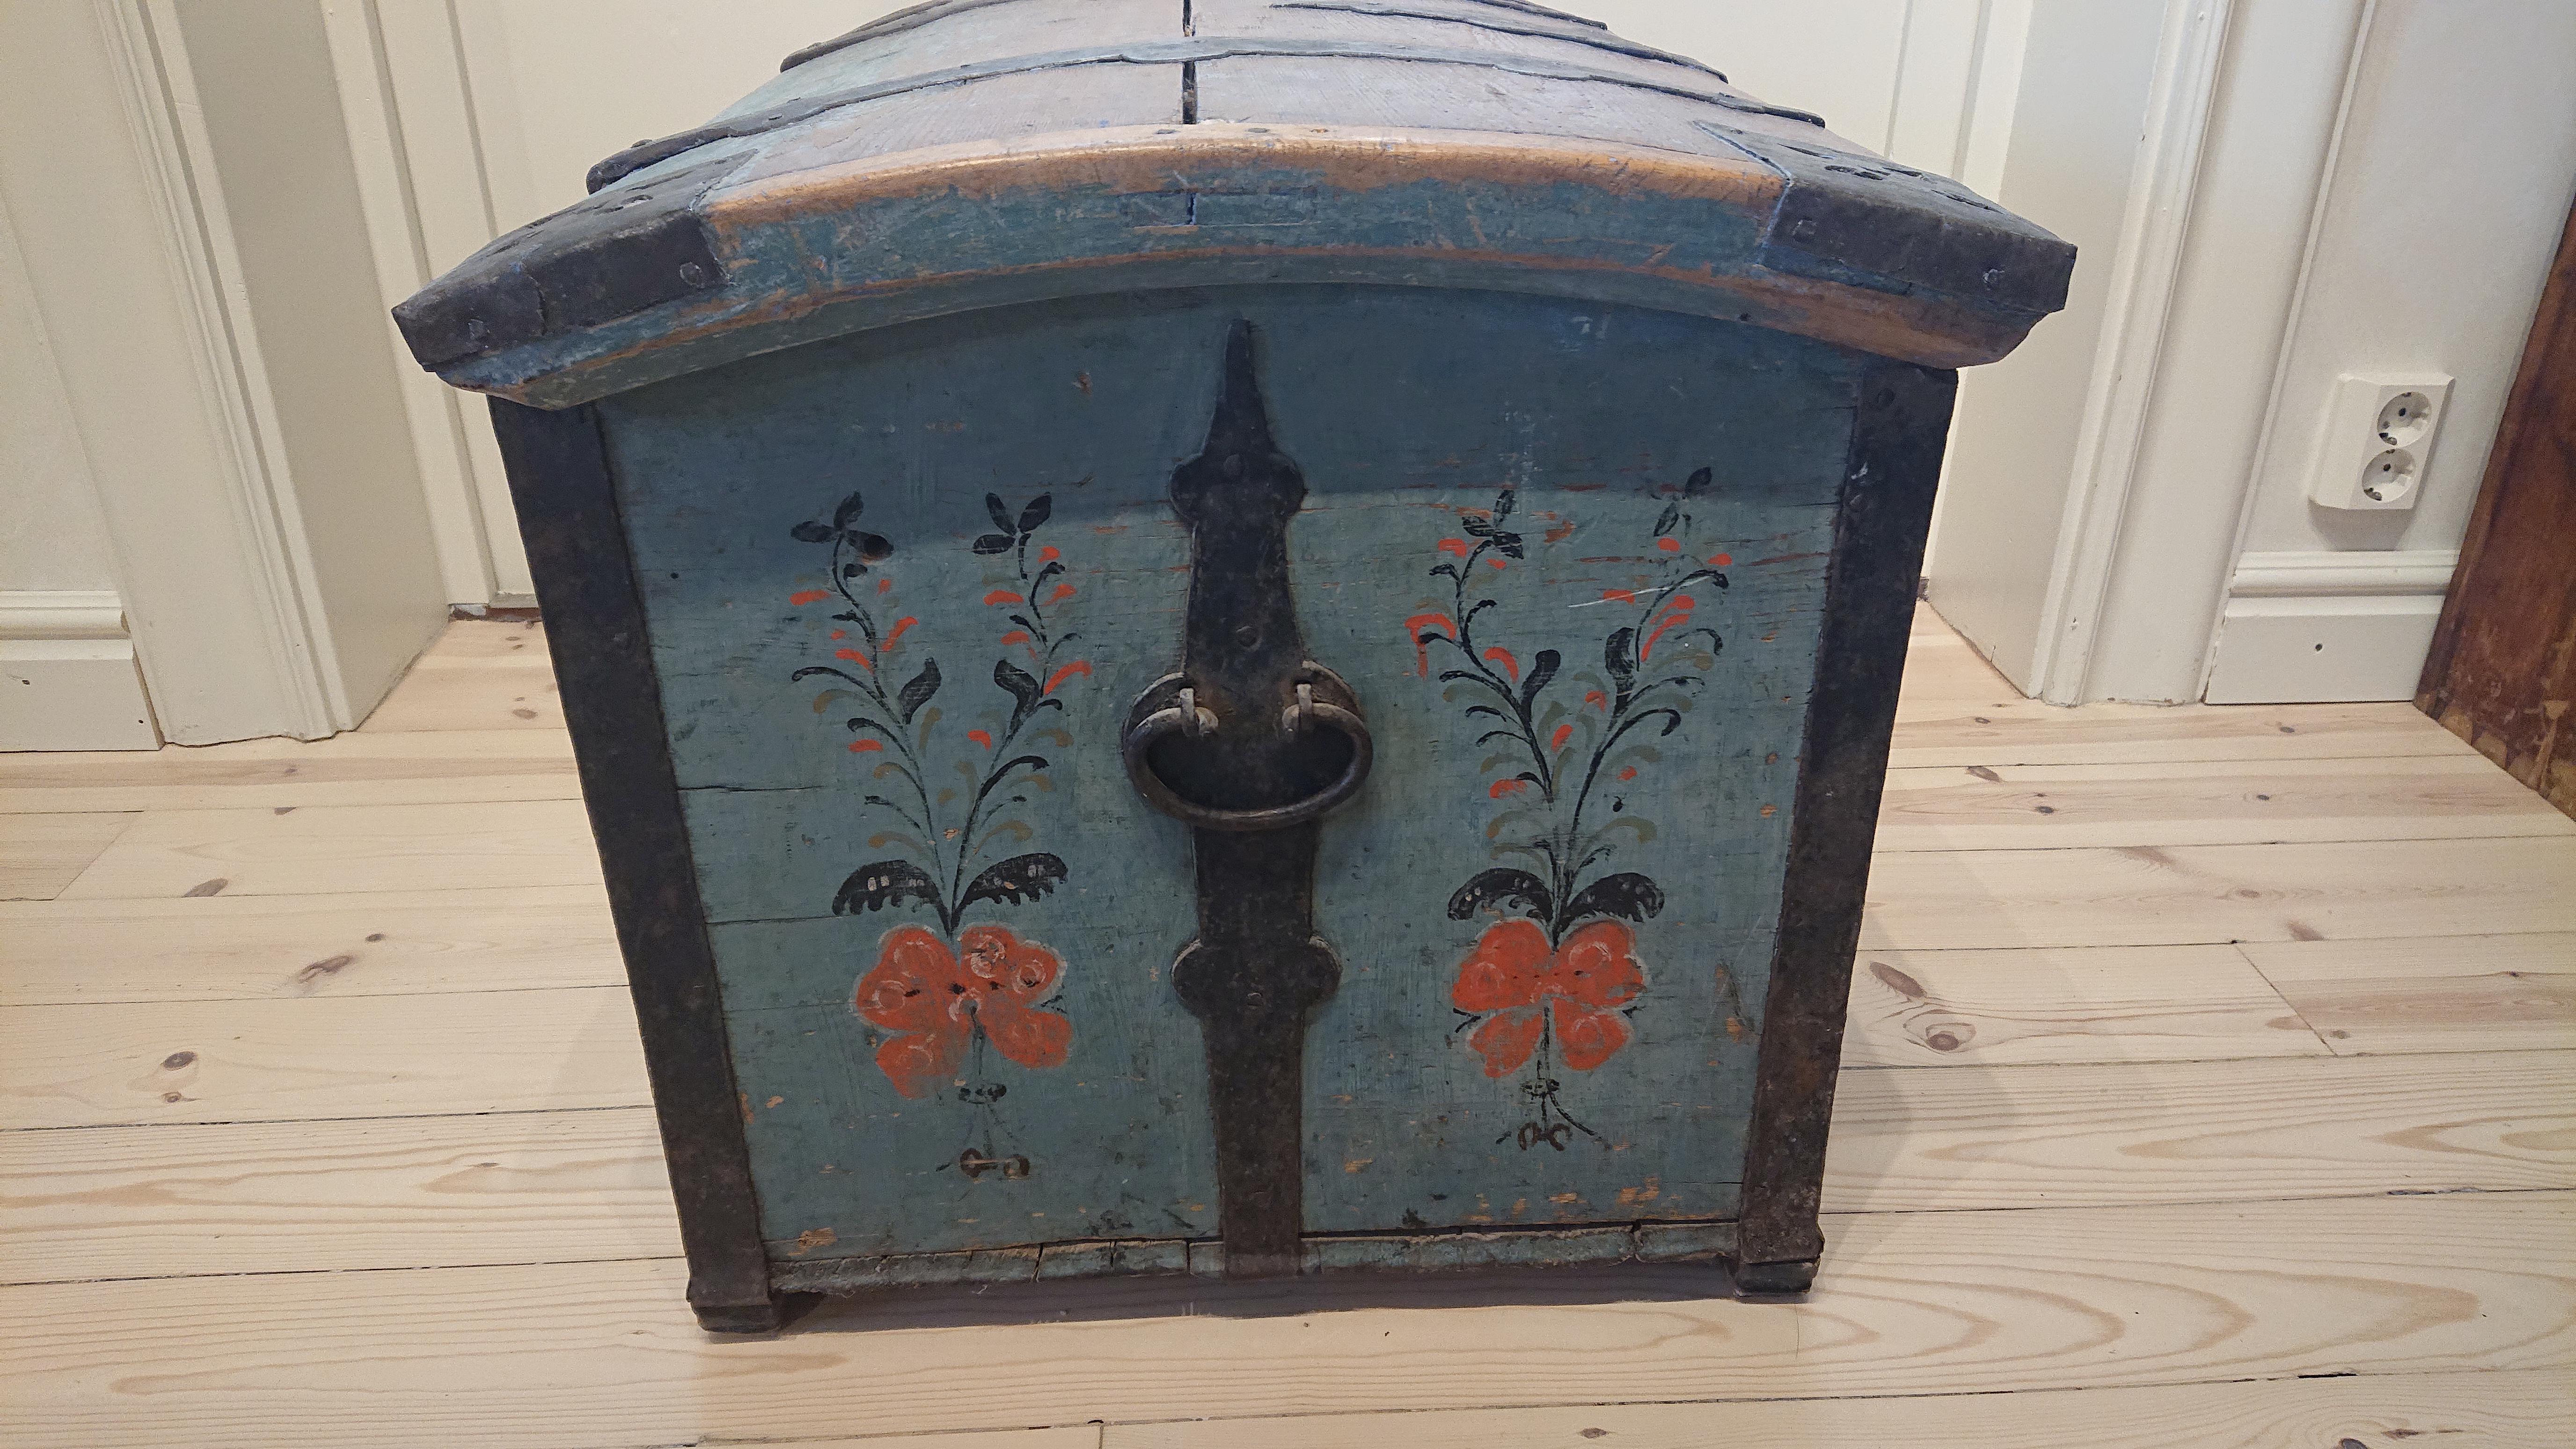 Decorative folkart chest with untouched originalpainting. Beautiful painting in the form of urns & flowerpainting. Early dating inside the lid 1797. 
Dated on the outside & inside 1804 & initials, probably a wedding gift. 
Made of pine.
Genuine